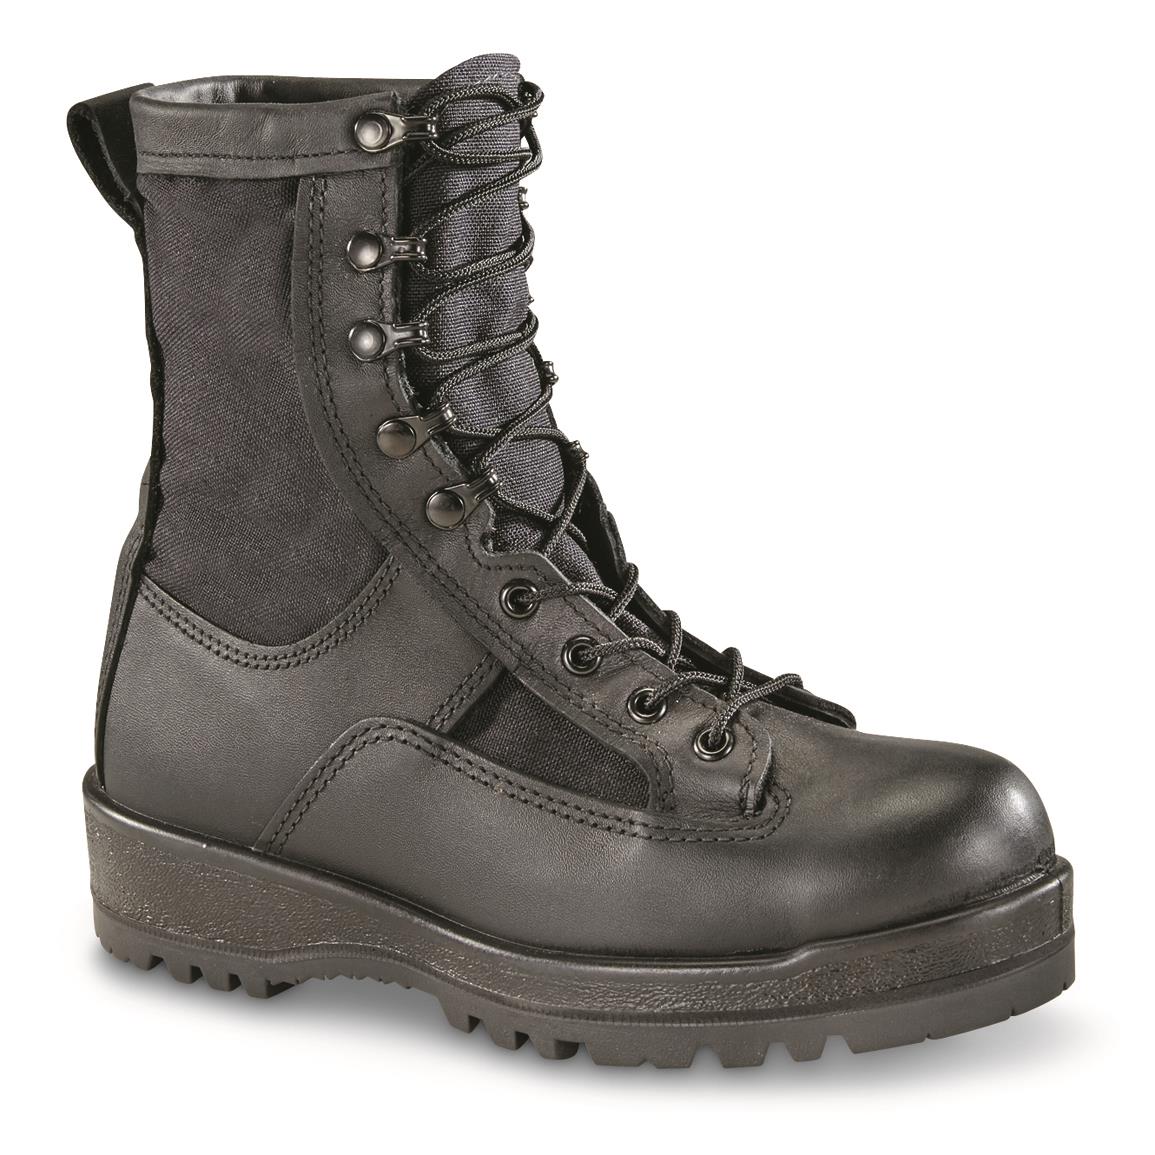 Army Boots Pictures - Army Military